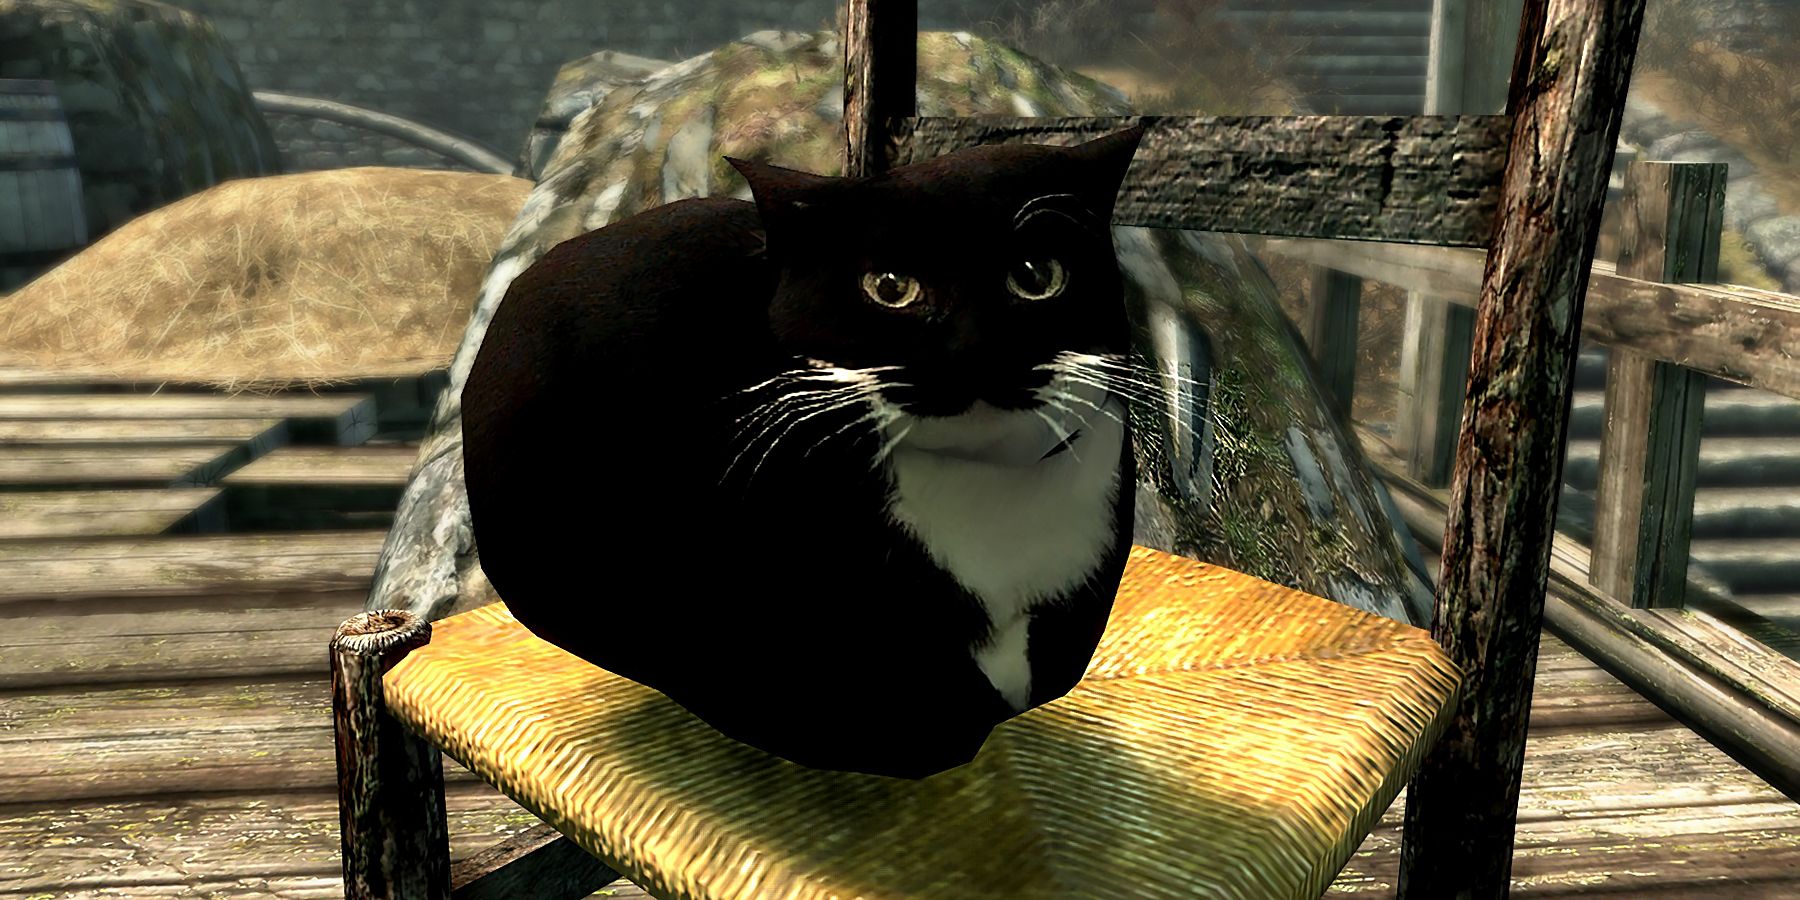 Skyrim Mod Adds Maxwell the Cat to the Game